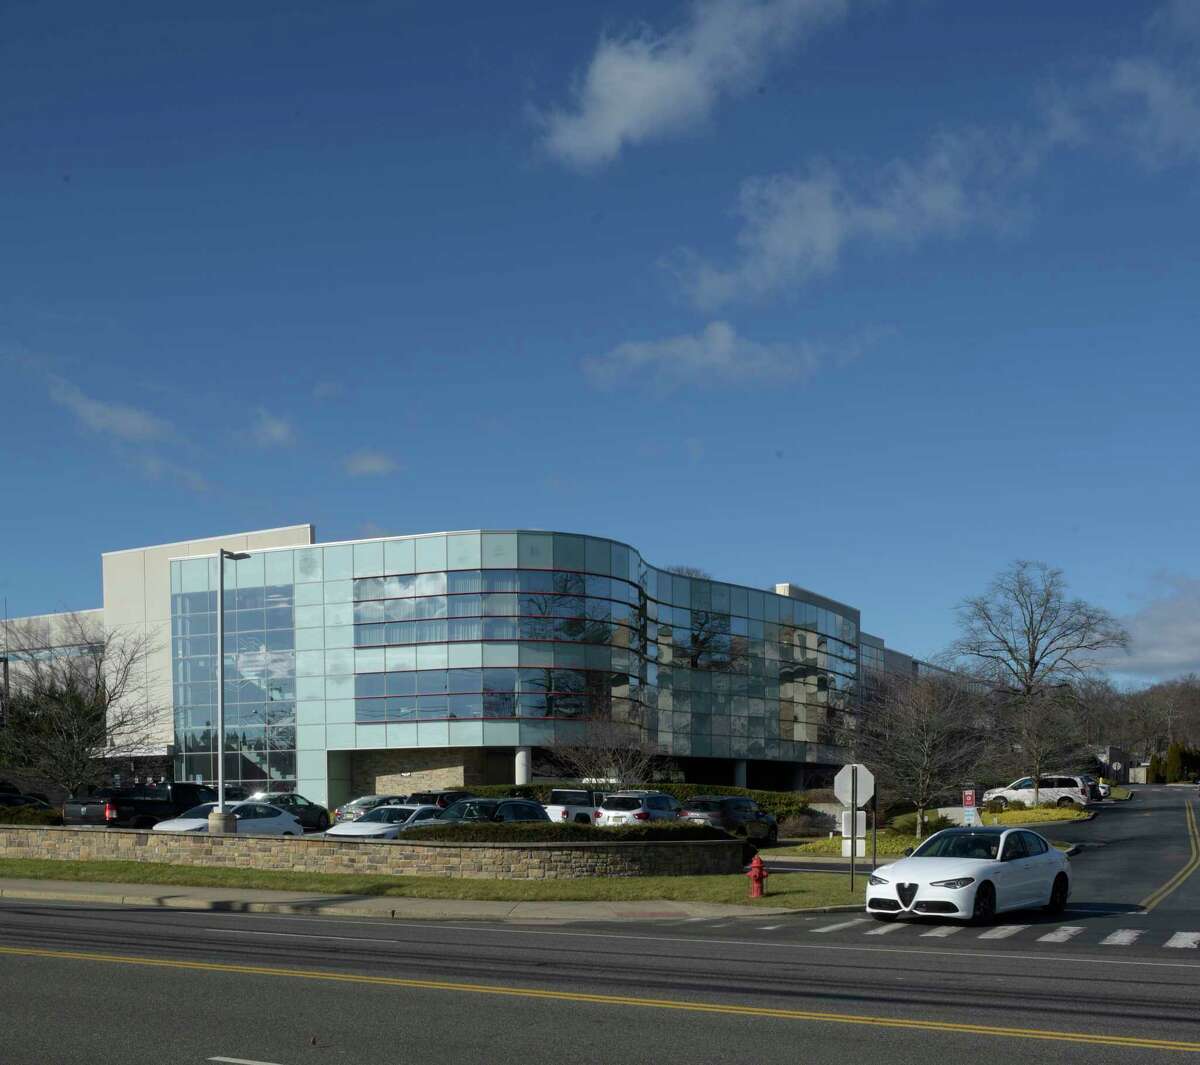 Campbell Soup Co., the parent company of Pepperidge Farm, is closing the 105,000-square-foot headquarters and development center in Norwalk for Campbell's Snacks, which includes Pepperidge Farm, and moving the 170 jobs to the Campbell head office in Camden, N.J.   Pictured is the location at 595 Westport Avenue in Norwalk, Conn. which has been the home of the iconic Pepperidge Farm brand since 1947. Wednesday, January 18, 2023.